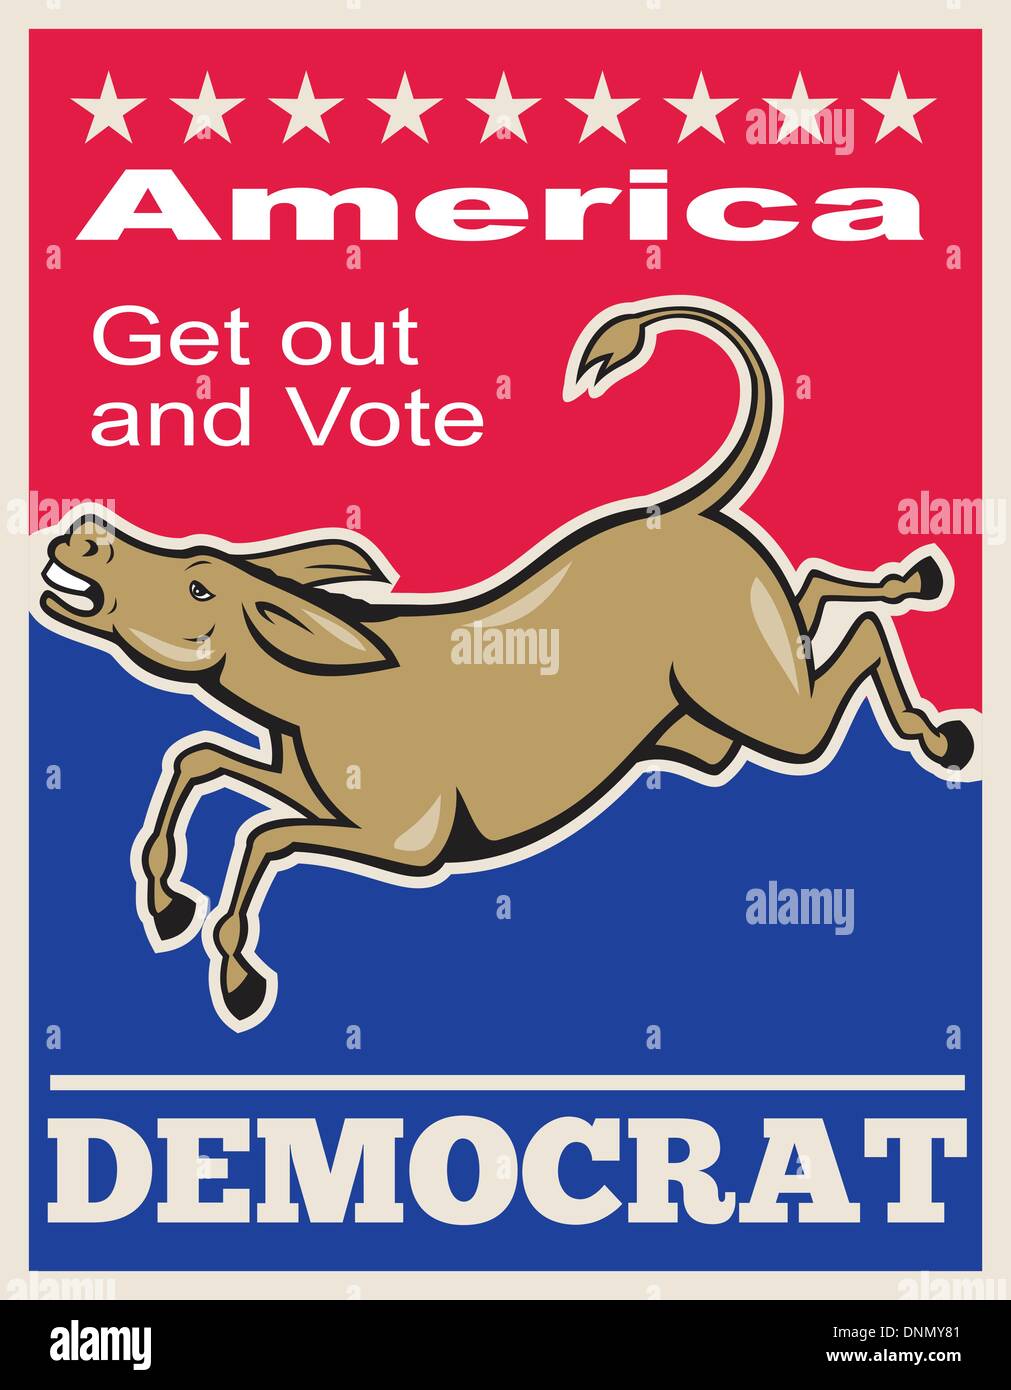 Poster illustration of a democrat donkey mascot of the democratic party jumping done in cartoon style with words America get out and vote democrat'.' Stock Vector